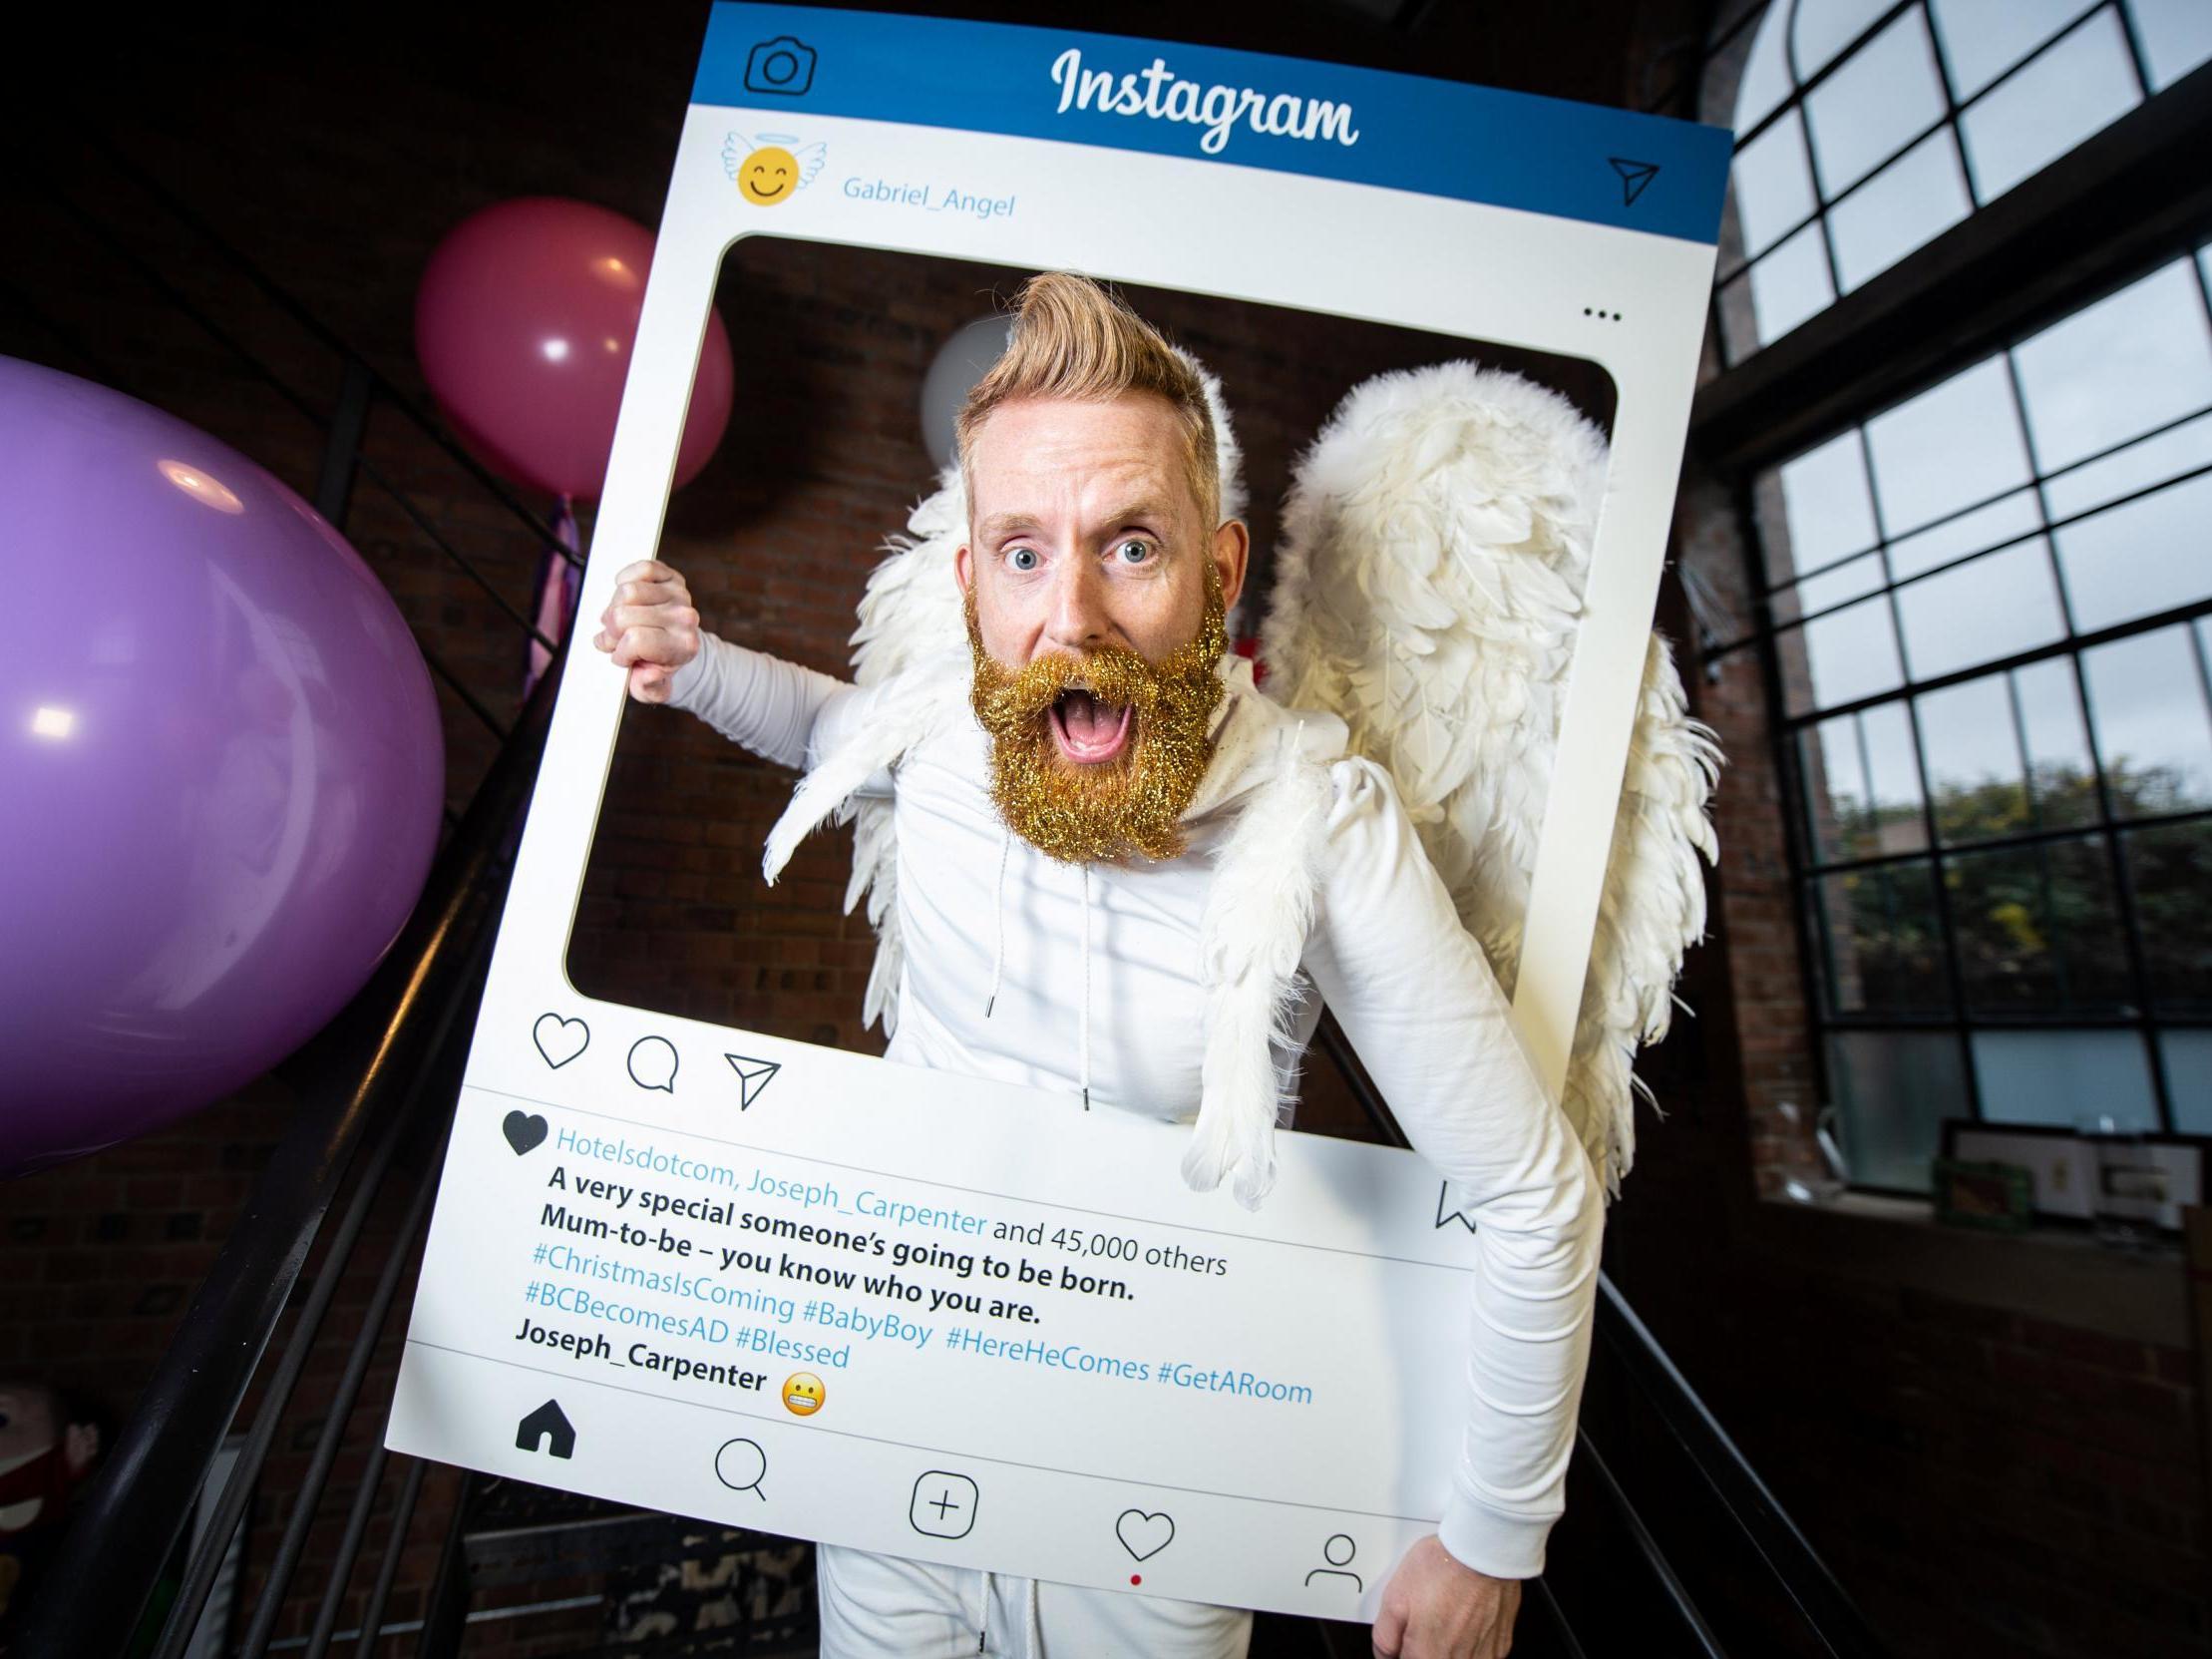 Those polled also revealed thoughts on how the nativity story might differ were it to happen now. Pictured: angel Gabriel appears via Instagram to Mary